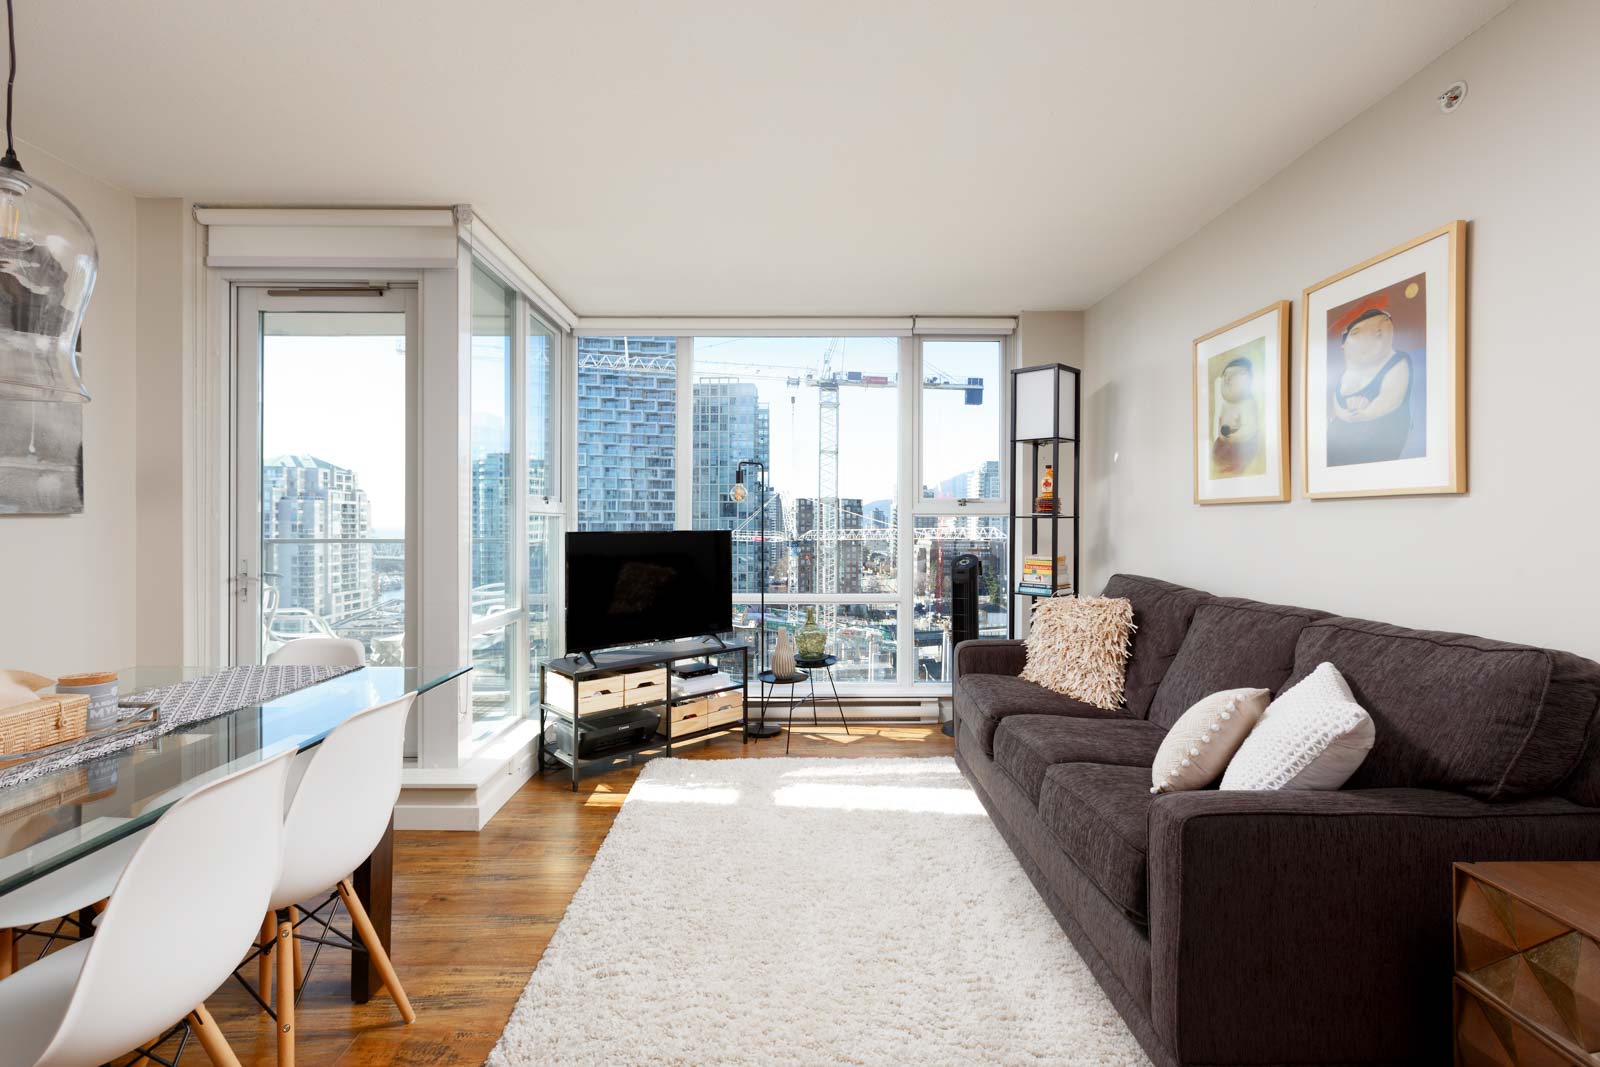 Living area with view in Yaletown Vancouver rental condo.